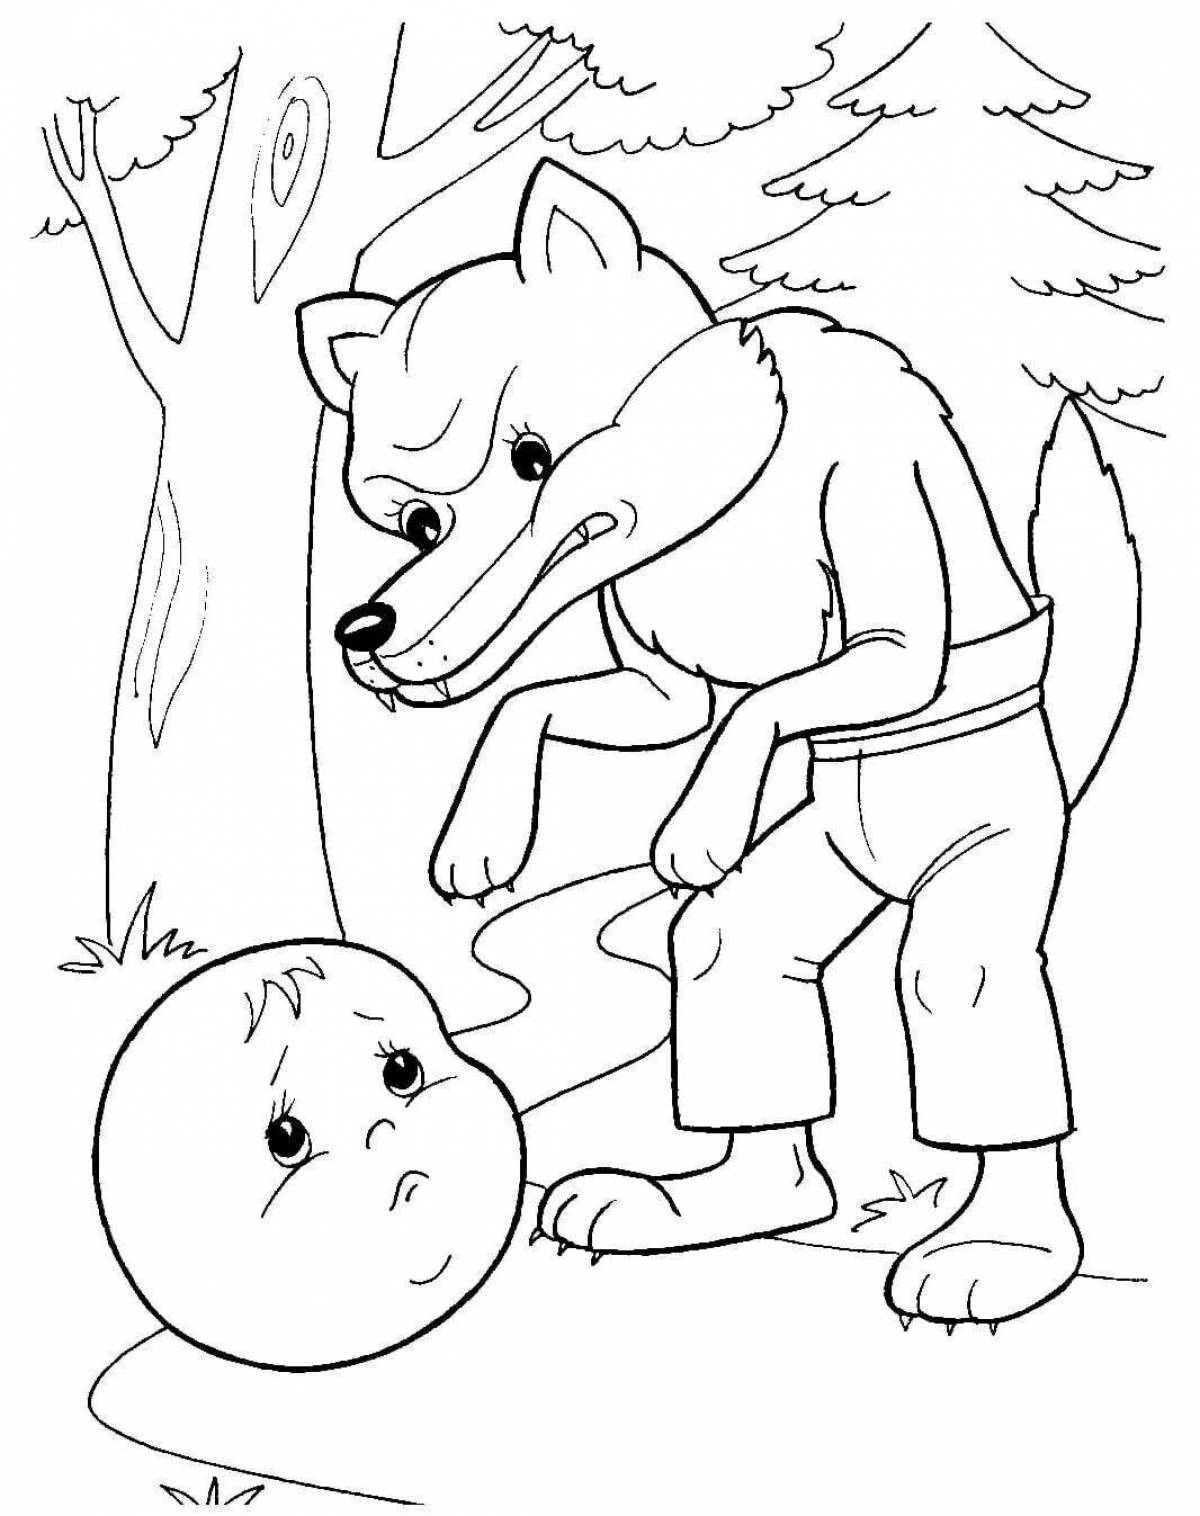 Coloring book amazing folk tales